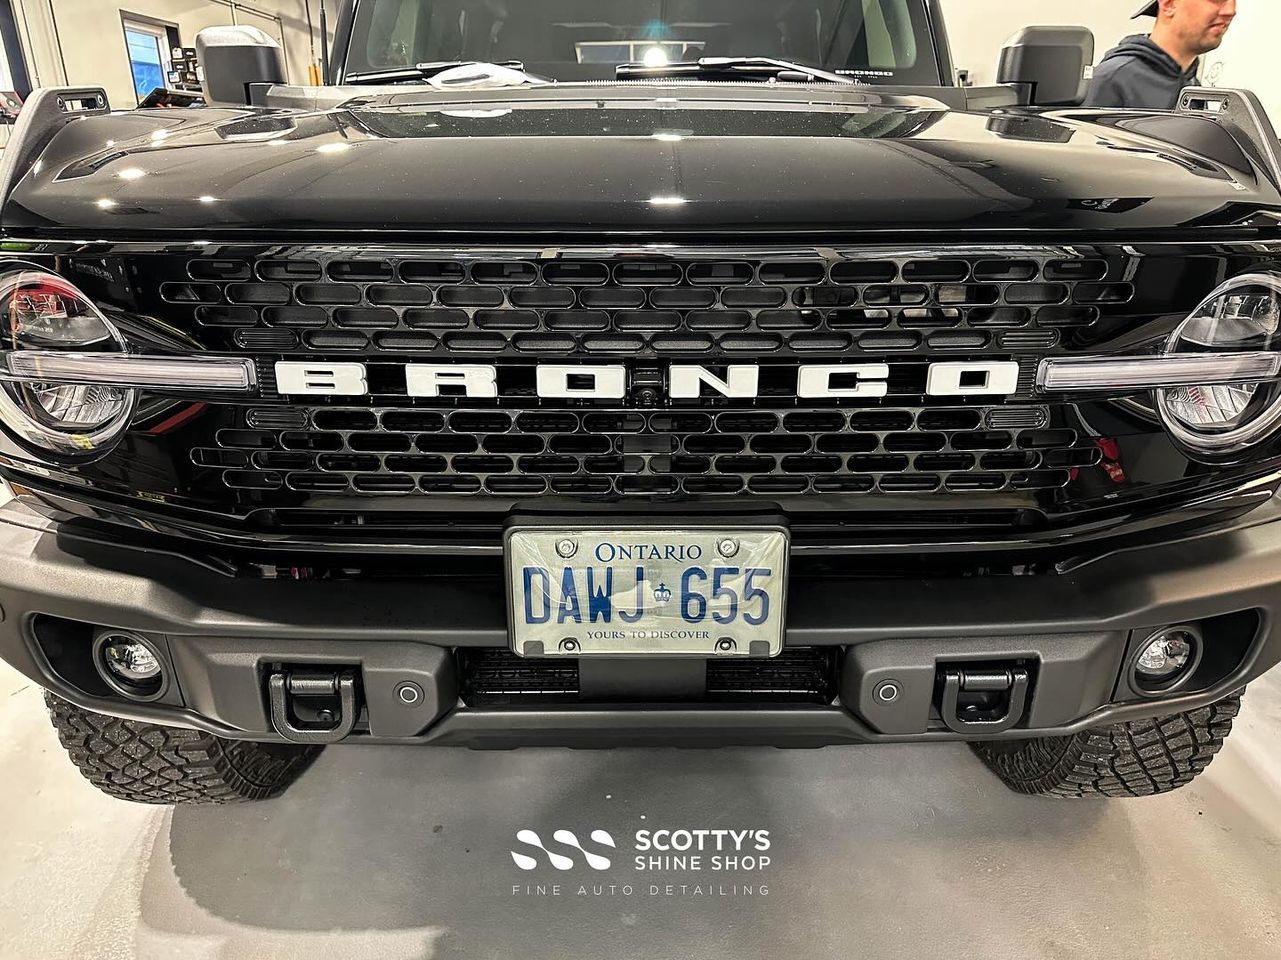 Little details make a big impact. This new Ford Bronco was at the shop for a paint correction and ce